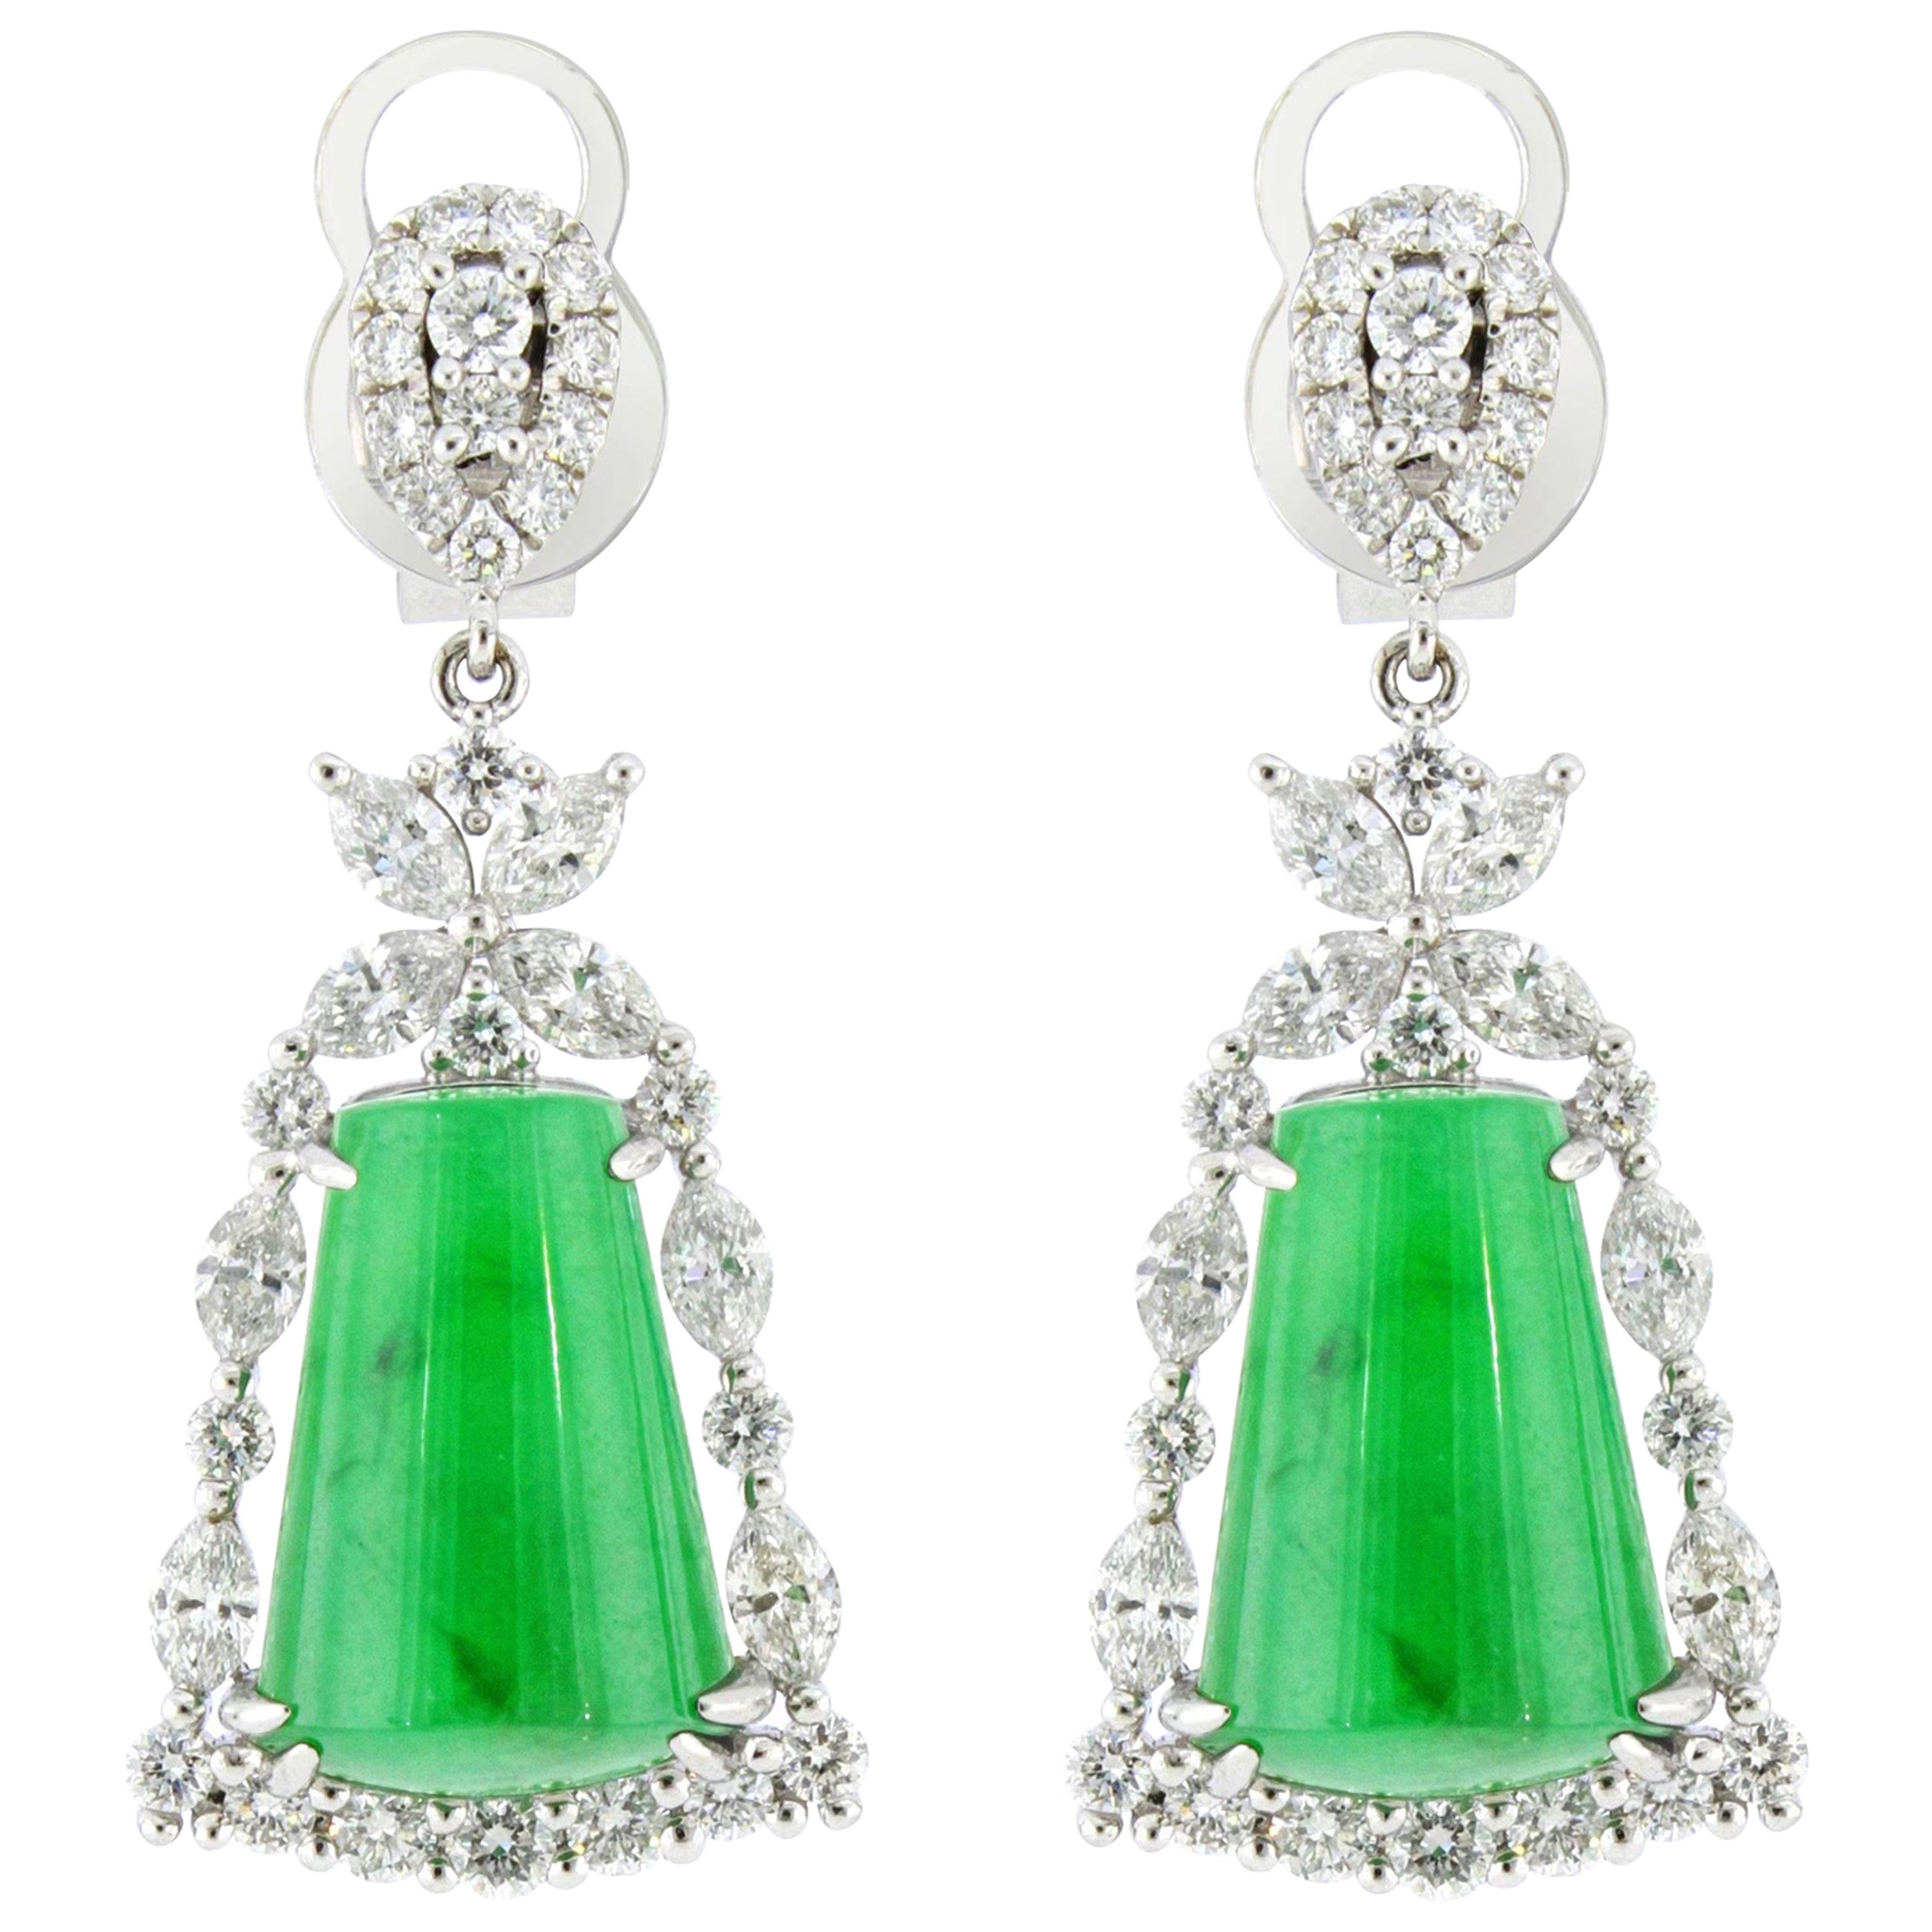 A Pair of Imperial Jadeite and Diamond Earrings in 18 Karat White Gold For Sale